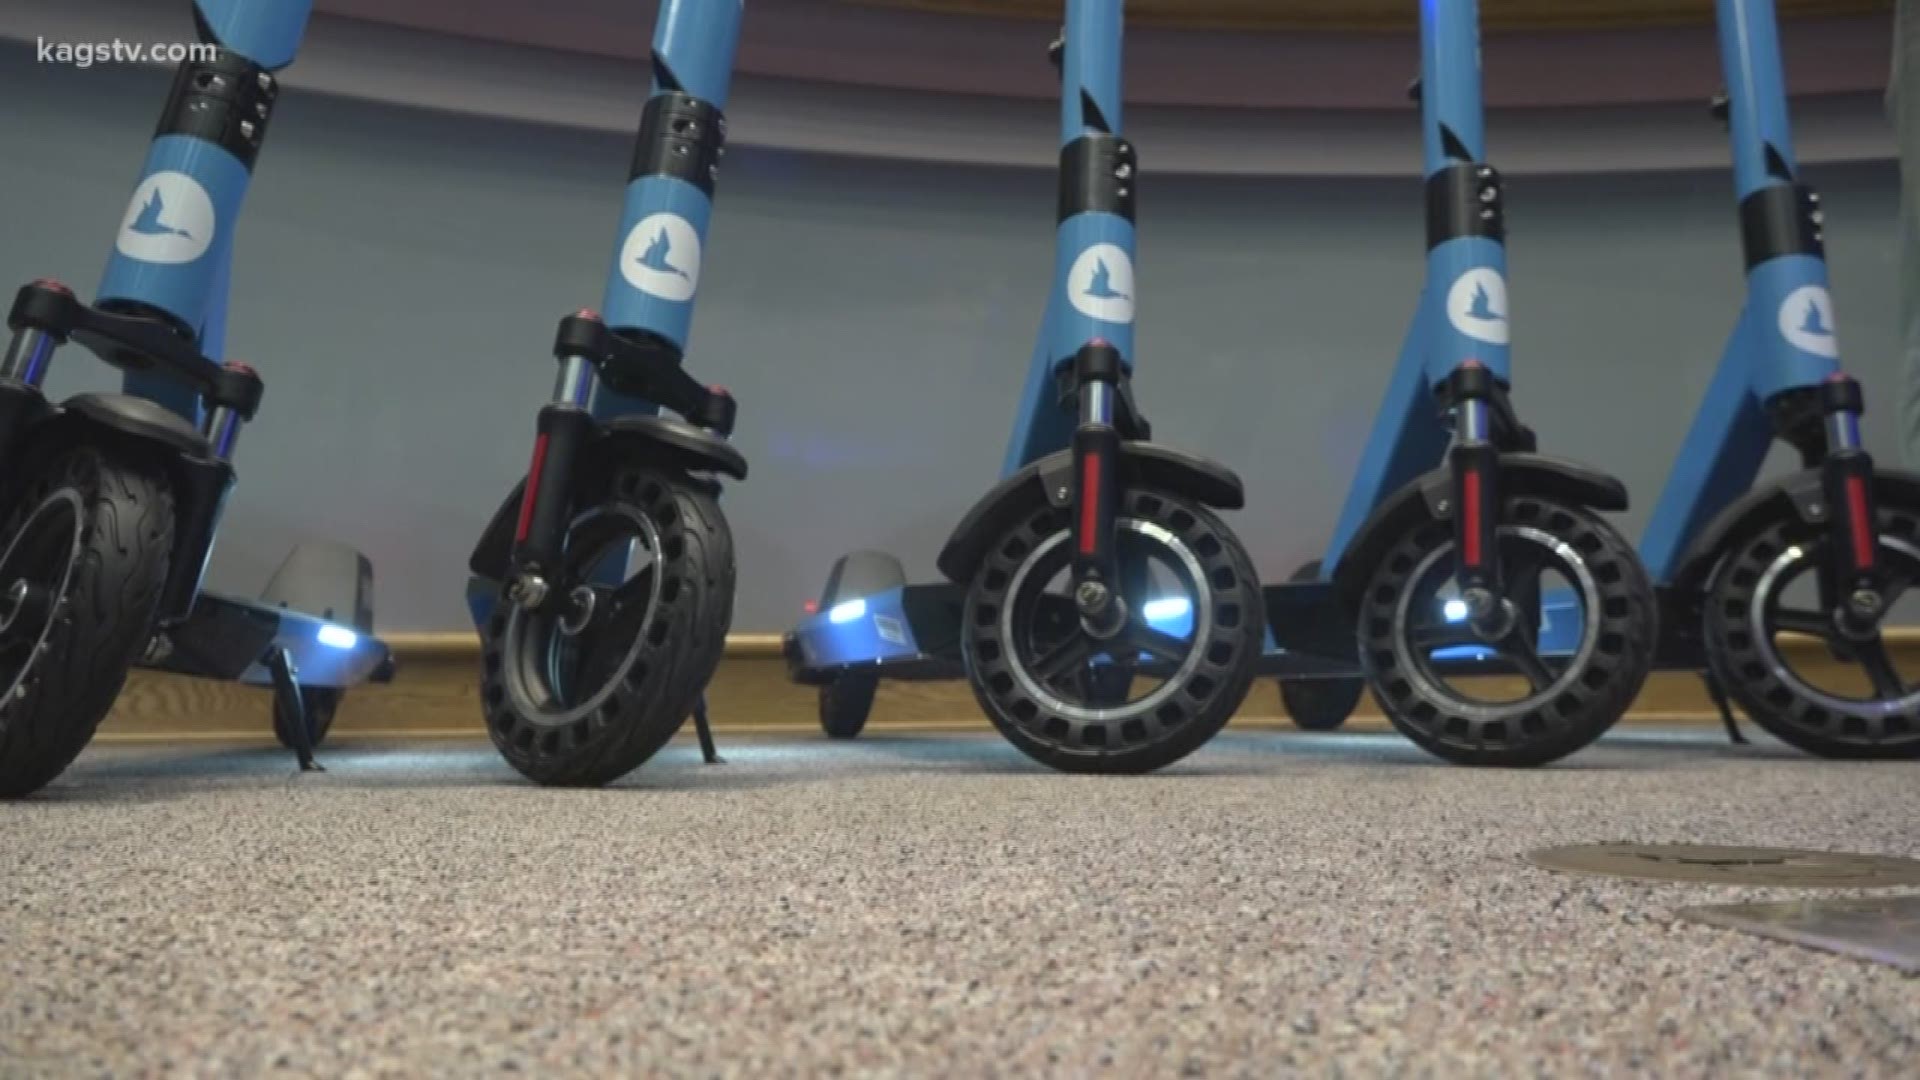 The scooters are part of a six month pilot program.